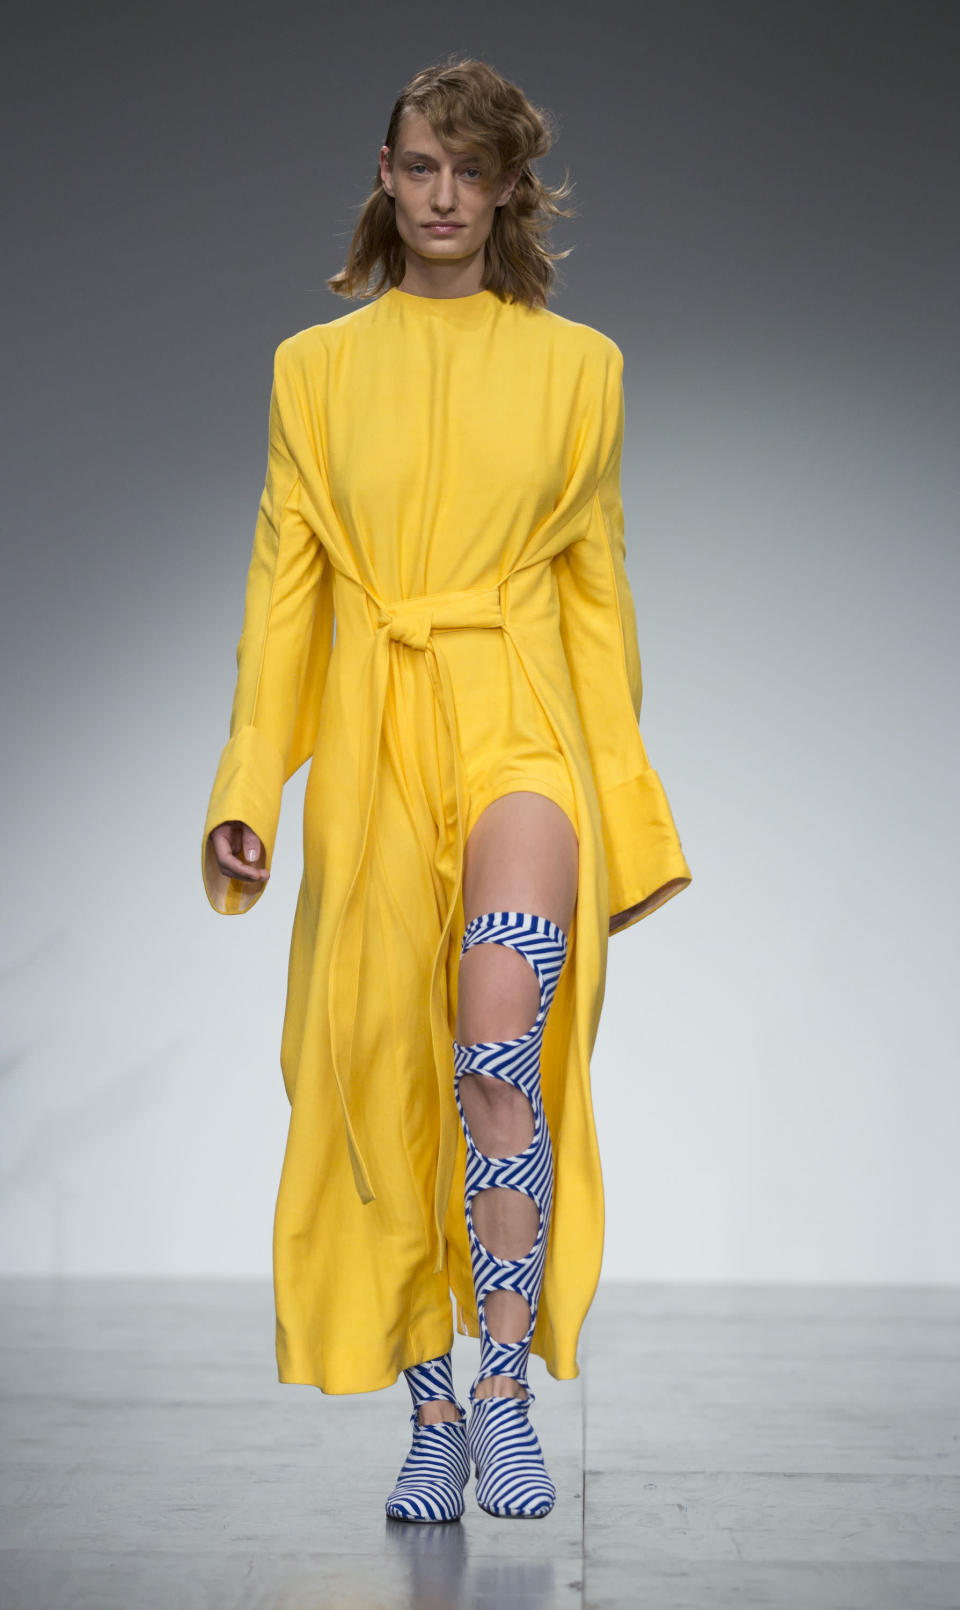 <p>Over at Richard Malone, models also stepped out in yellow. When shopping for the hue, opt for supersized sleeves and wrap-around silhouettes. <em>[Photo: PA]</em> </p>